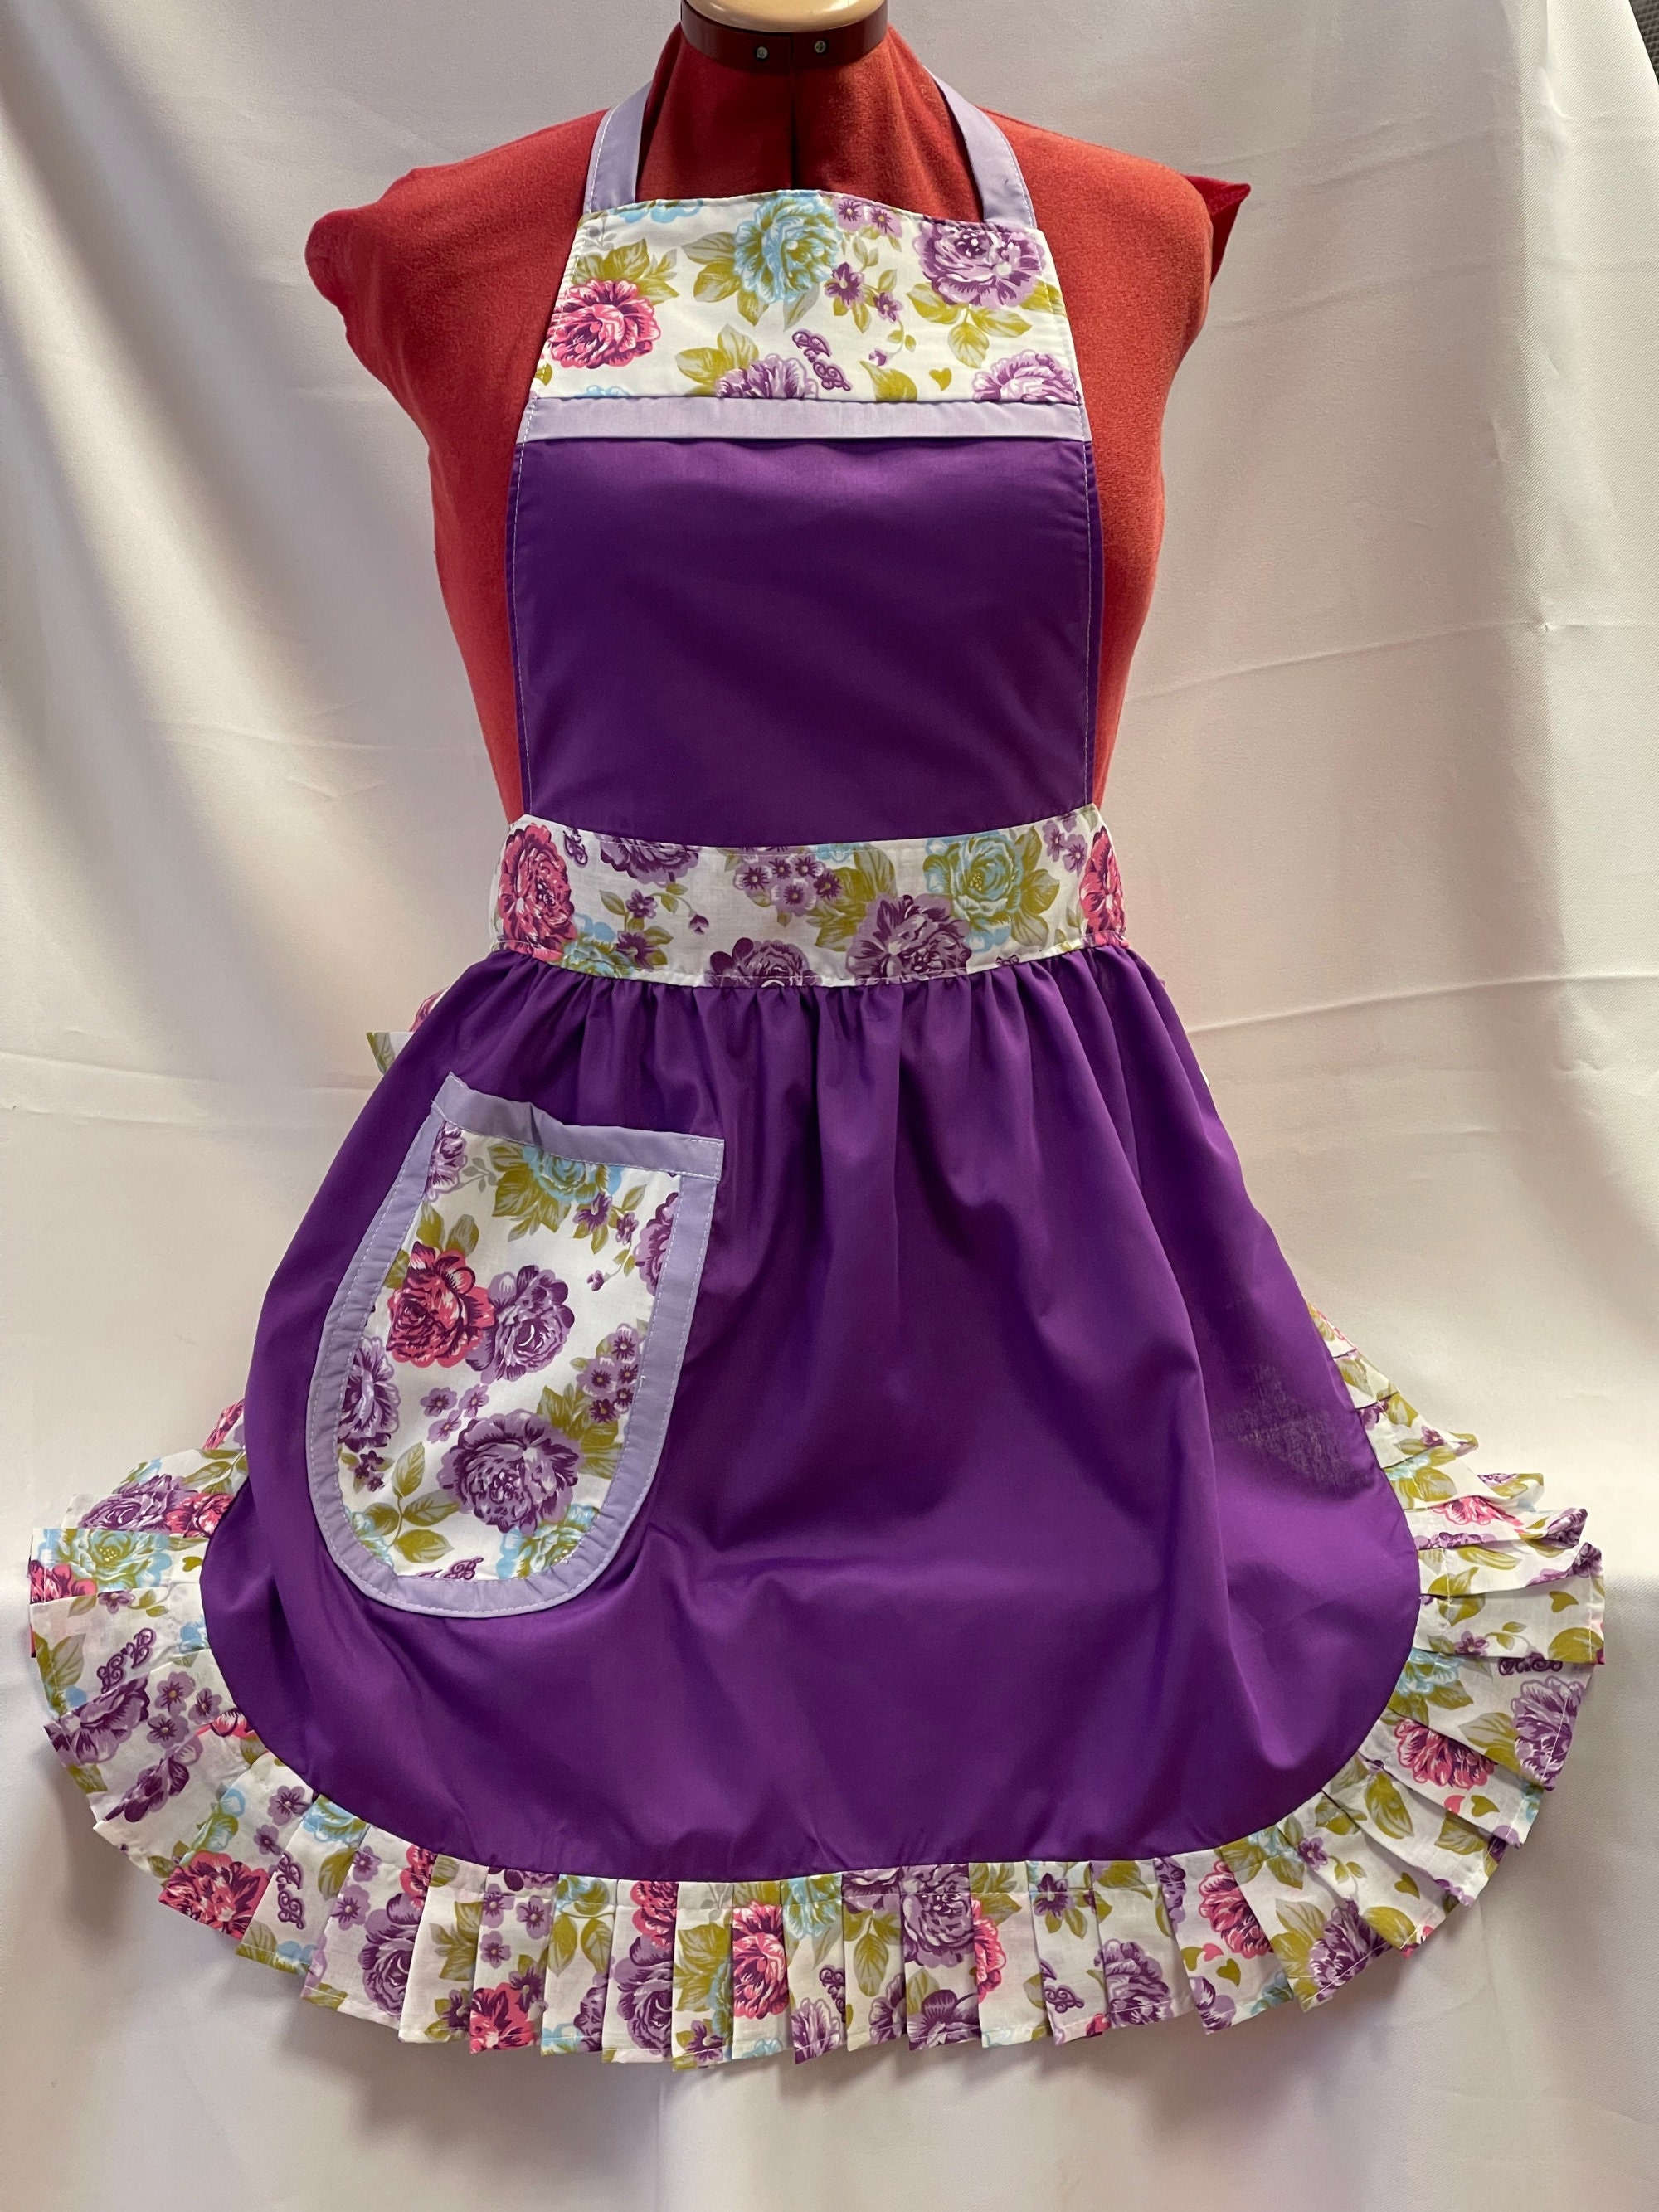 LILAC WITH CREAM AND FLORAL TRIM PINNY RETRO VINTAGE 50s STYLE HALF APRON